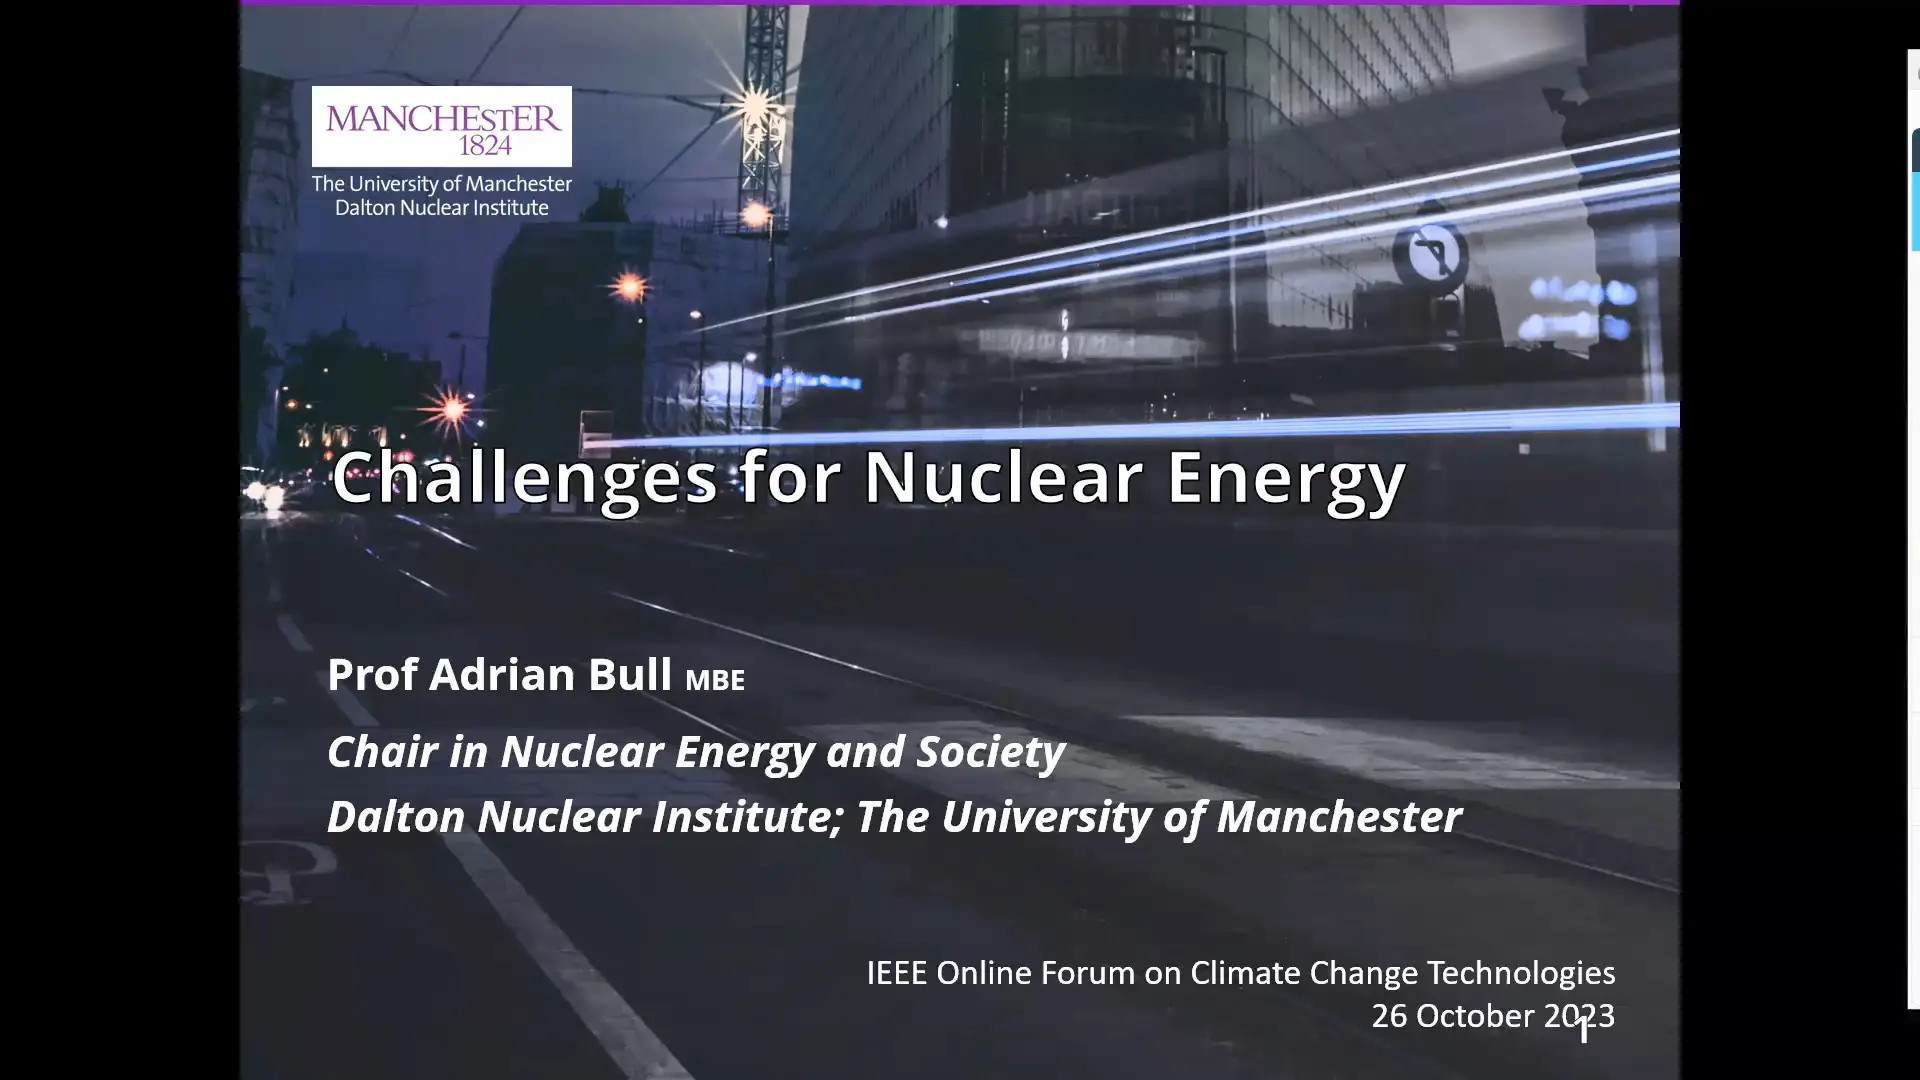 IEEE OFCCT 2023: Panel 4.1: Recent Trends in Nuclear Power